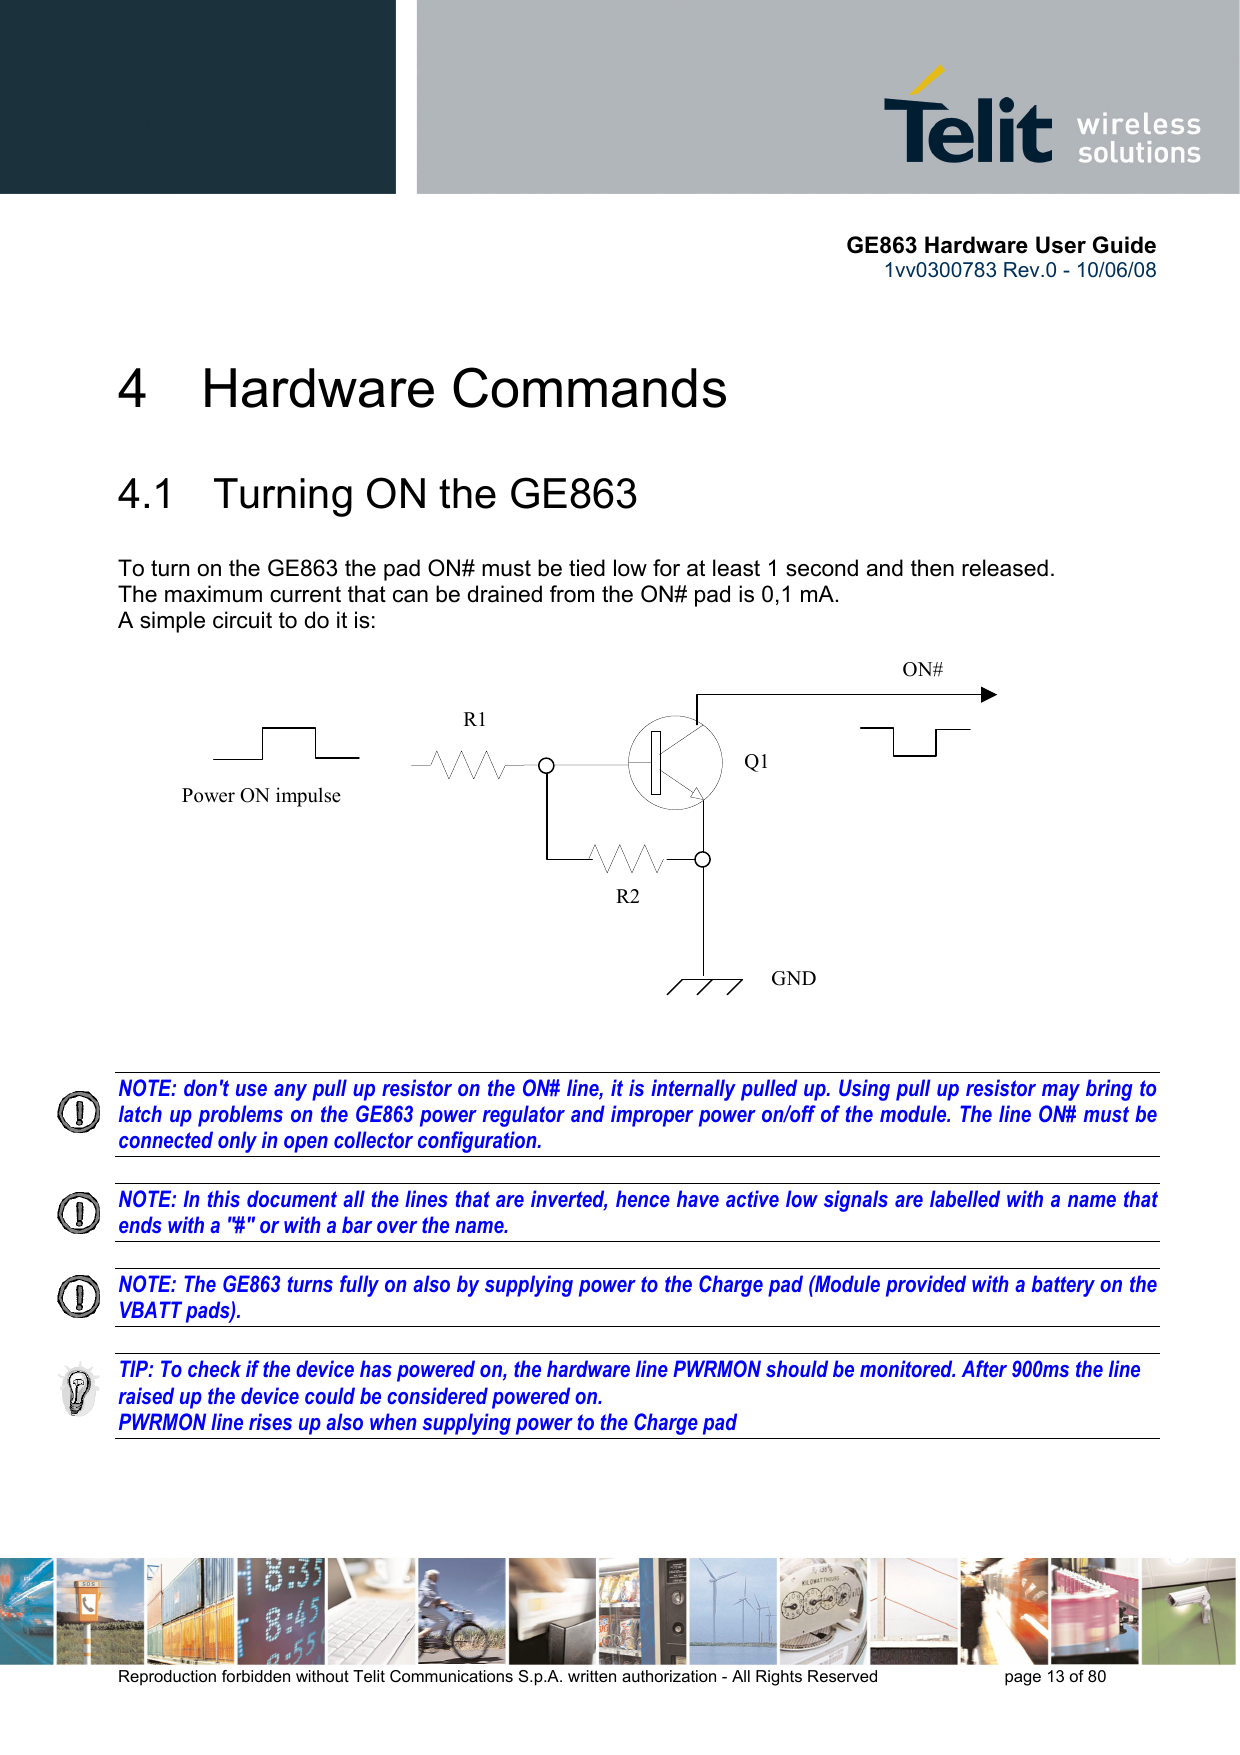       GE863 Hardware User Guide 1vv0300783 Rev.0 - 10/06/08 Reproduction forbidden without Telit Communications S.p.A. written authorization - All Rights Reserved    page 13 of 80  4 Hardware Commands 4.1   Turning ON the GE863 To turn on the GE863 the pad ON# must be tied low for at least 1 second and then released. The maximum current that can be drained from the ON# pad is 0,1 mA. A simple circuit to do it is:   NOTE: don&apos;t use any pull up resistor on the ON# line, it is internally pulled up. Using pull up resistor may bring to latch up problems on the GE863 power regulator and improper power on/off of the module. The line ON# must be connected only in open collector configuration.  NOTE: In this document all the lines that are inverted, hence have active low signals are labelled with a name that ends with a &quot;#&quot; or with a bar over the name.  NOTE: The GE863 turns fully on also by supplying power to the Charge pad (Module provided with a battery on the VBATT pads).  TIP: To check if the device has powered on, the hardware line PWRMON should be monitored. After 900ms the line raised up the device could be considered powered on. PWRMON line rises up also when supplying power to the Charge pad    ON#Power ON impulse  GNDR1R2Q1